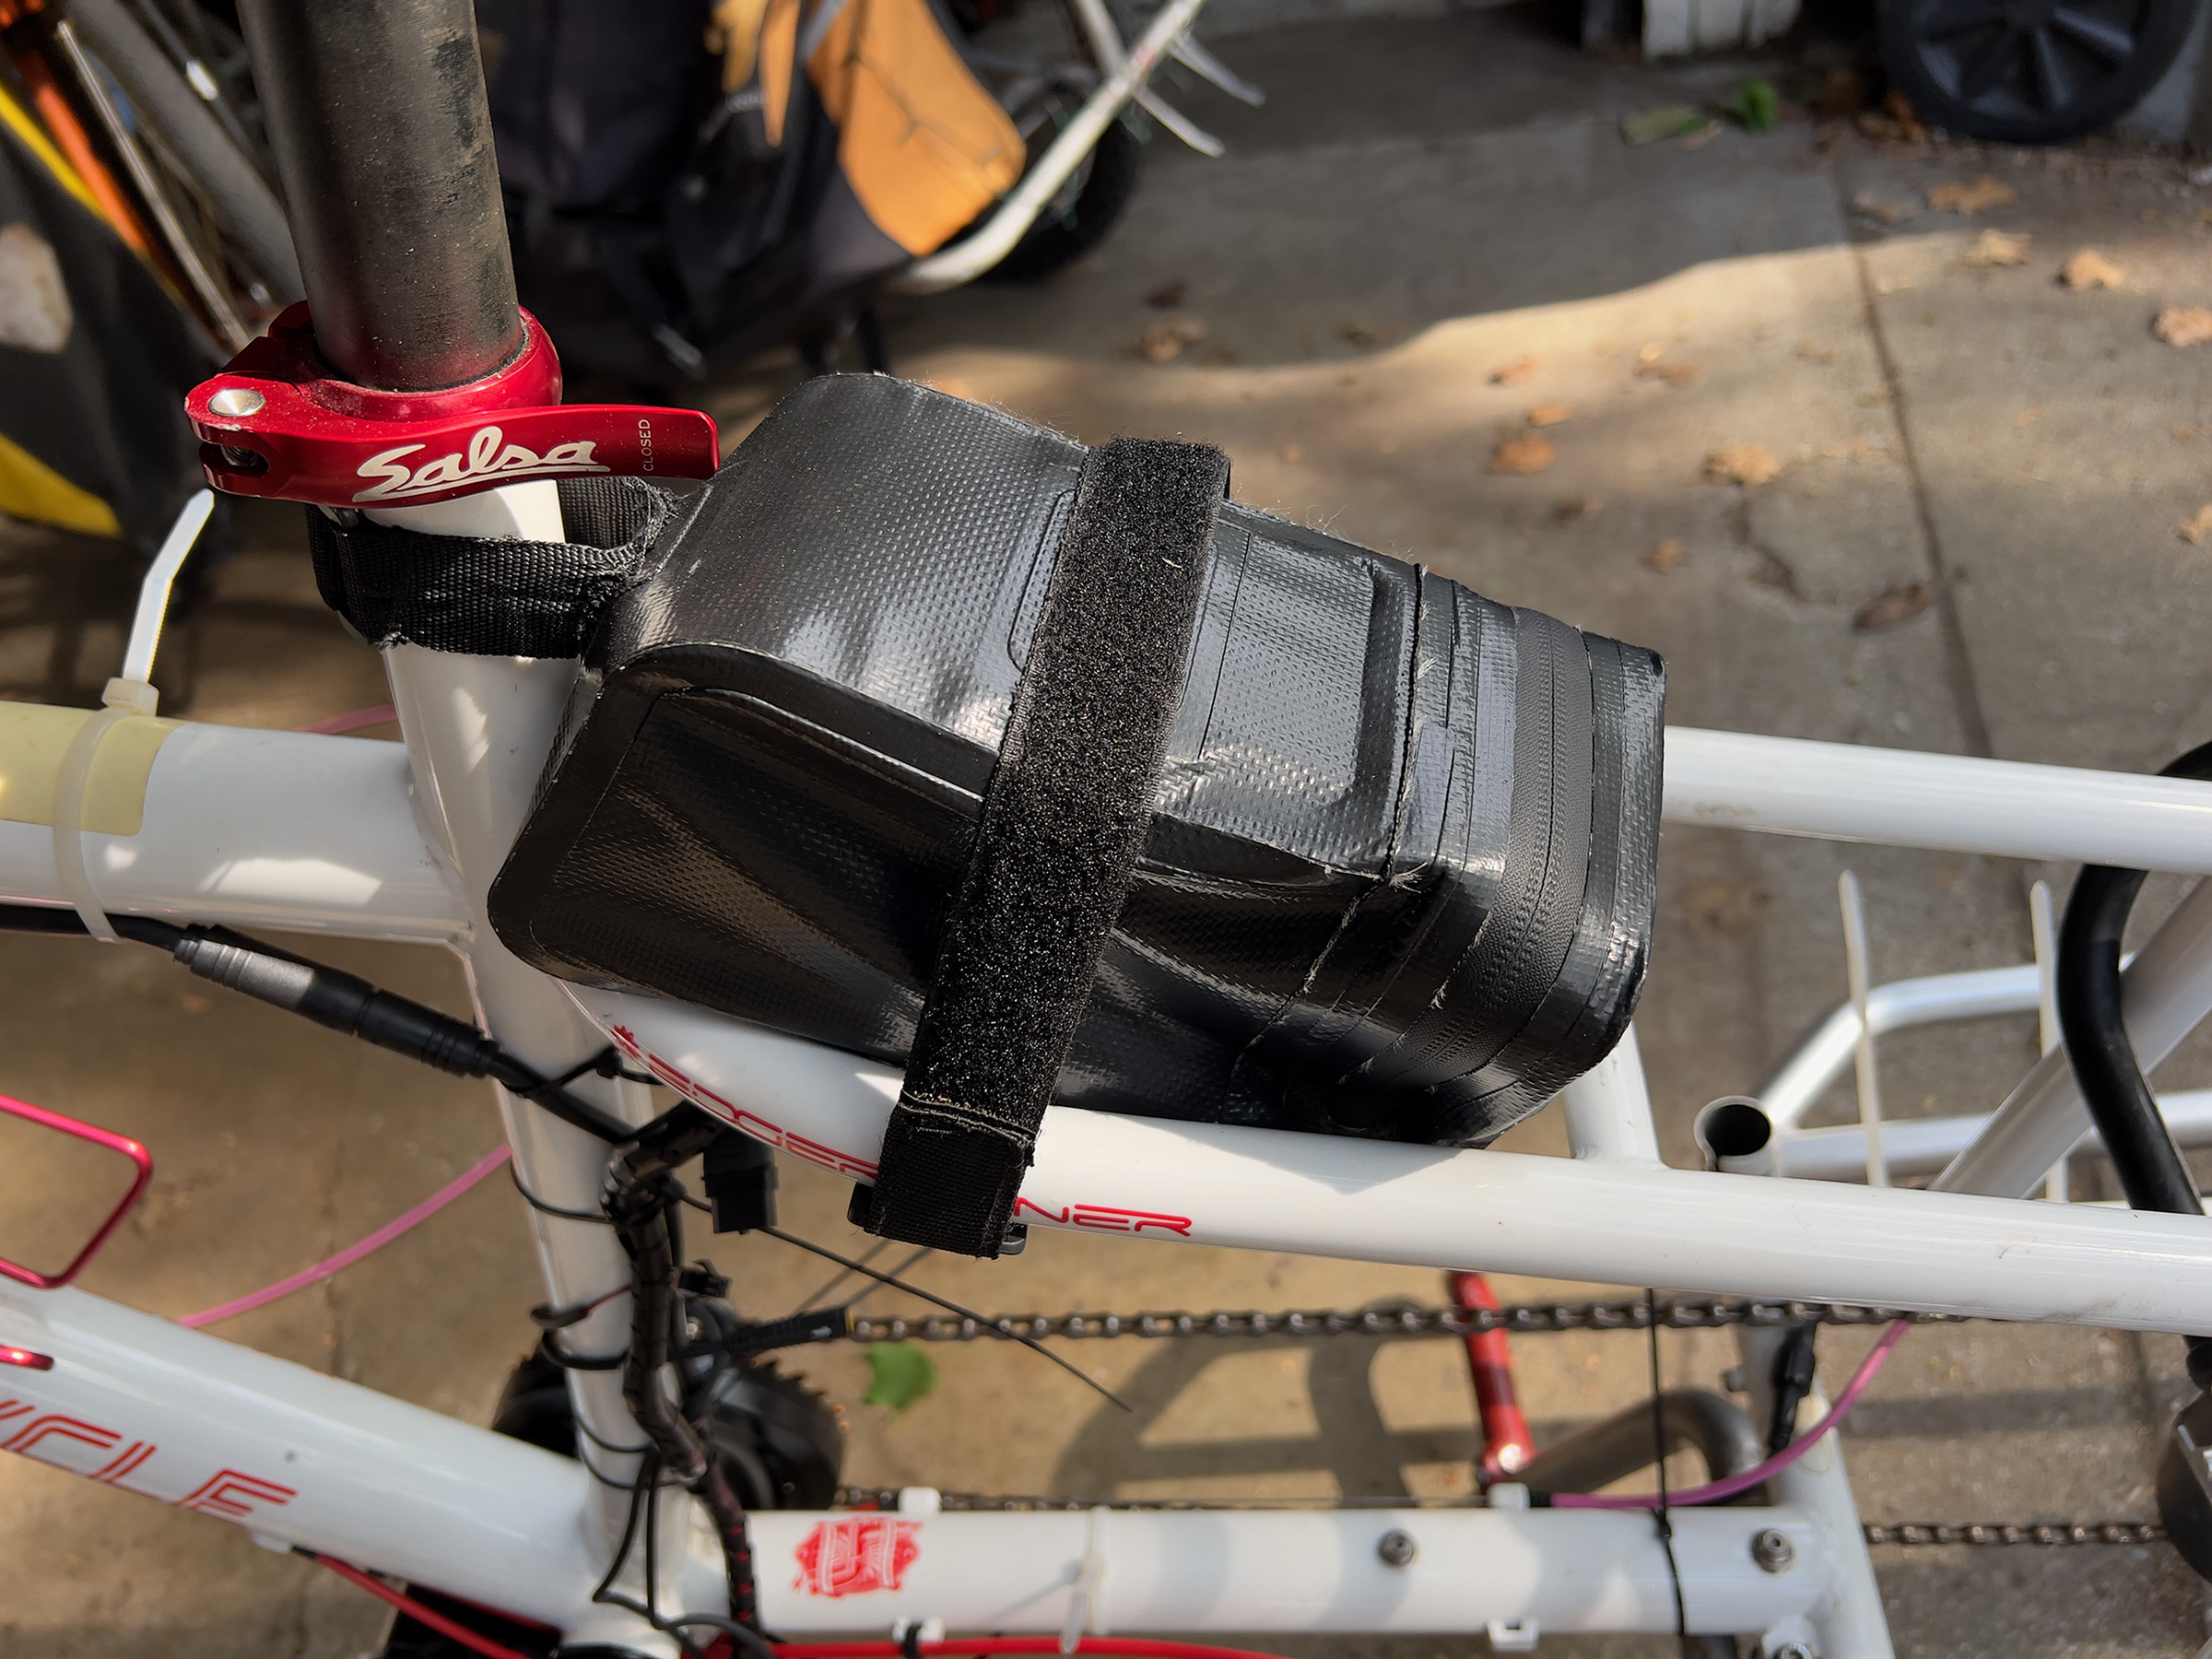 A picture of the battery bag strapped to the frame, with its velcro straps struggling to hold on.